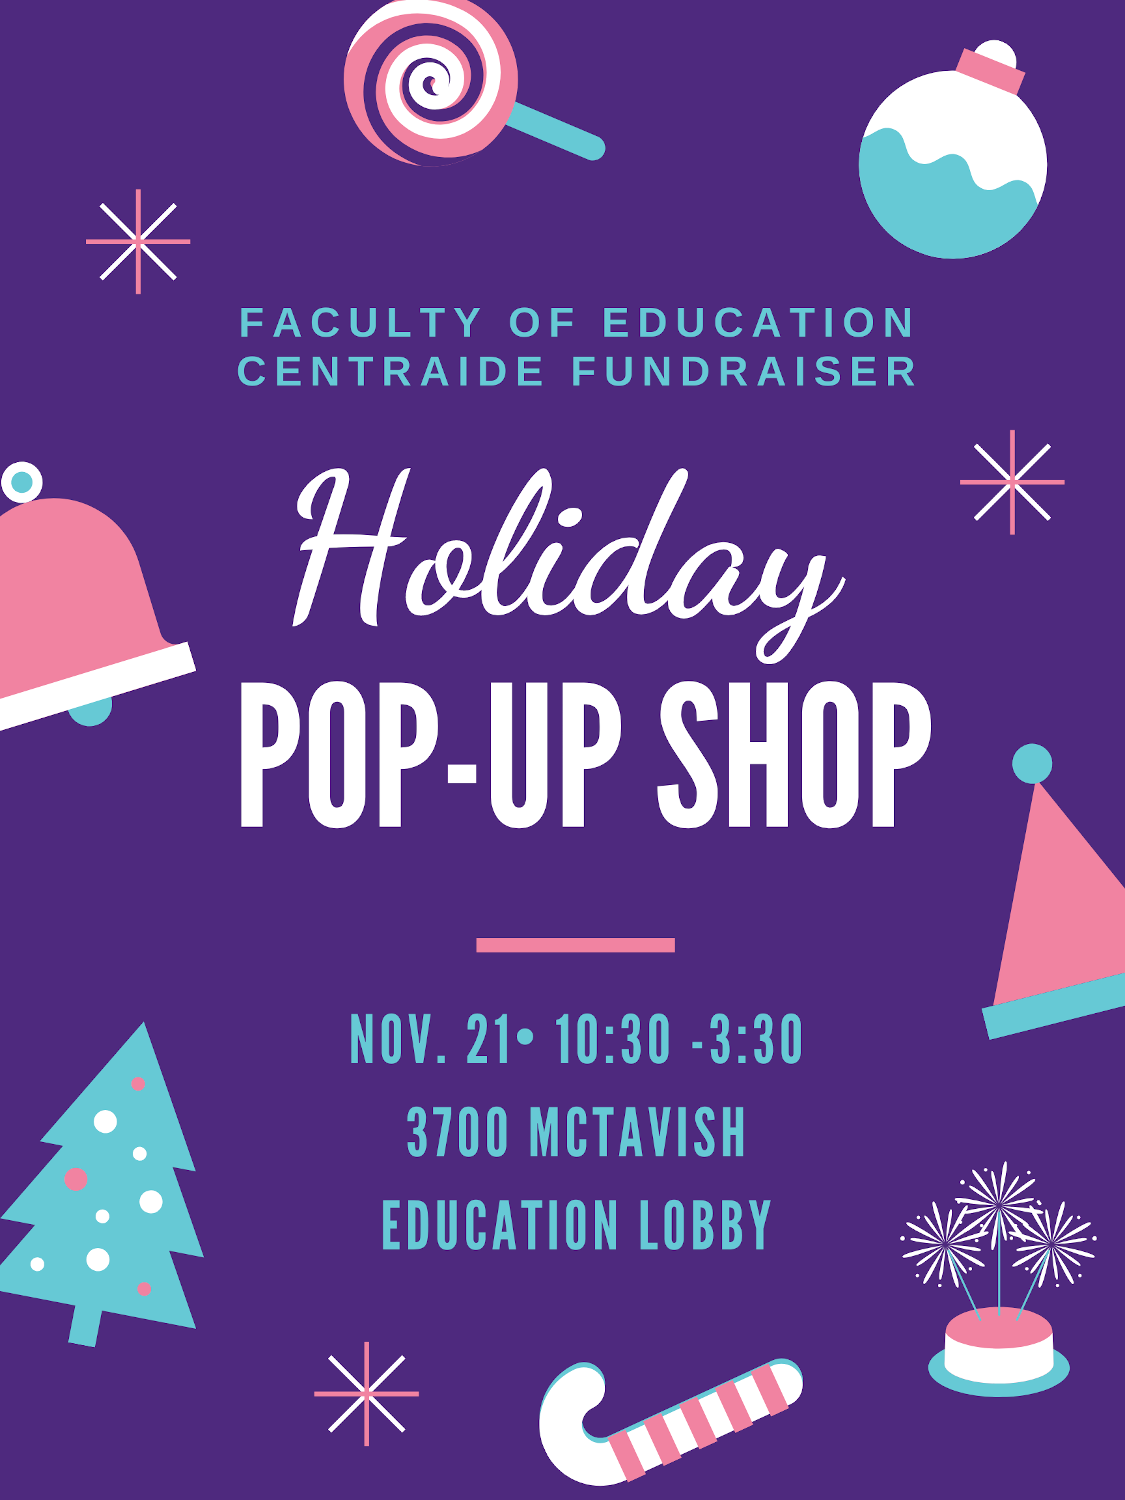 Education Holiday Pop-Up Shop